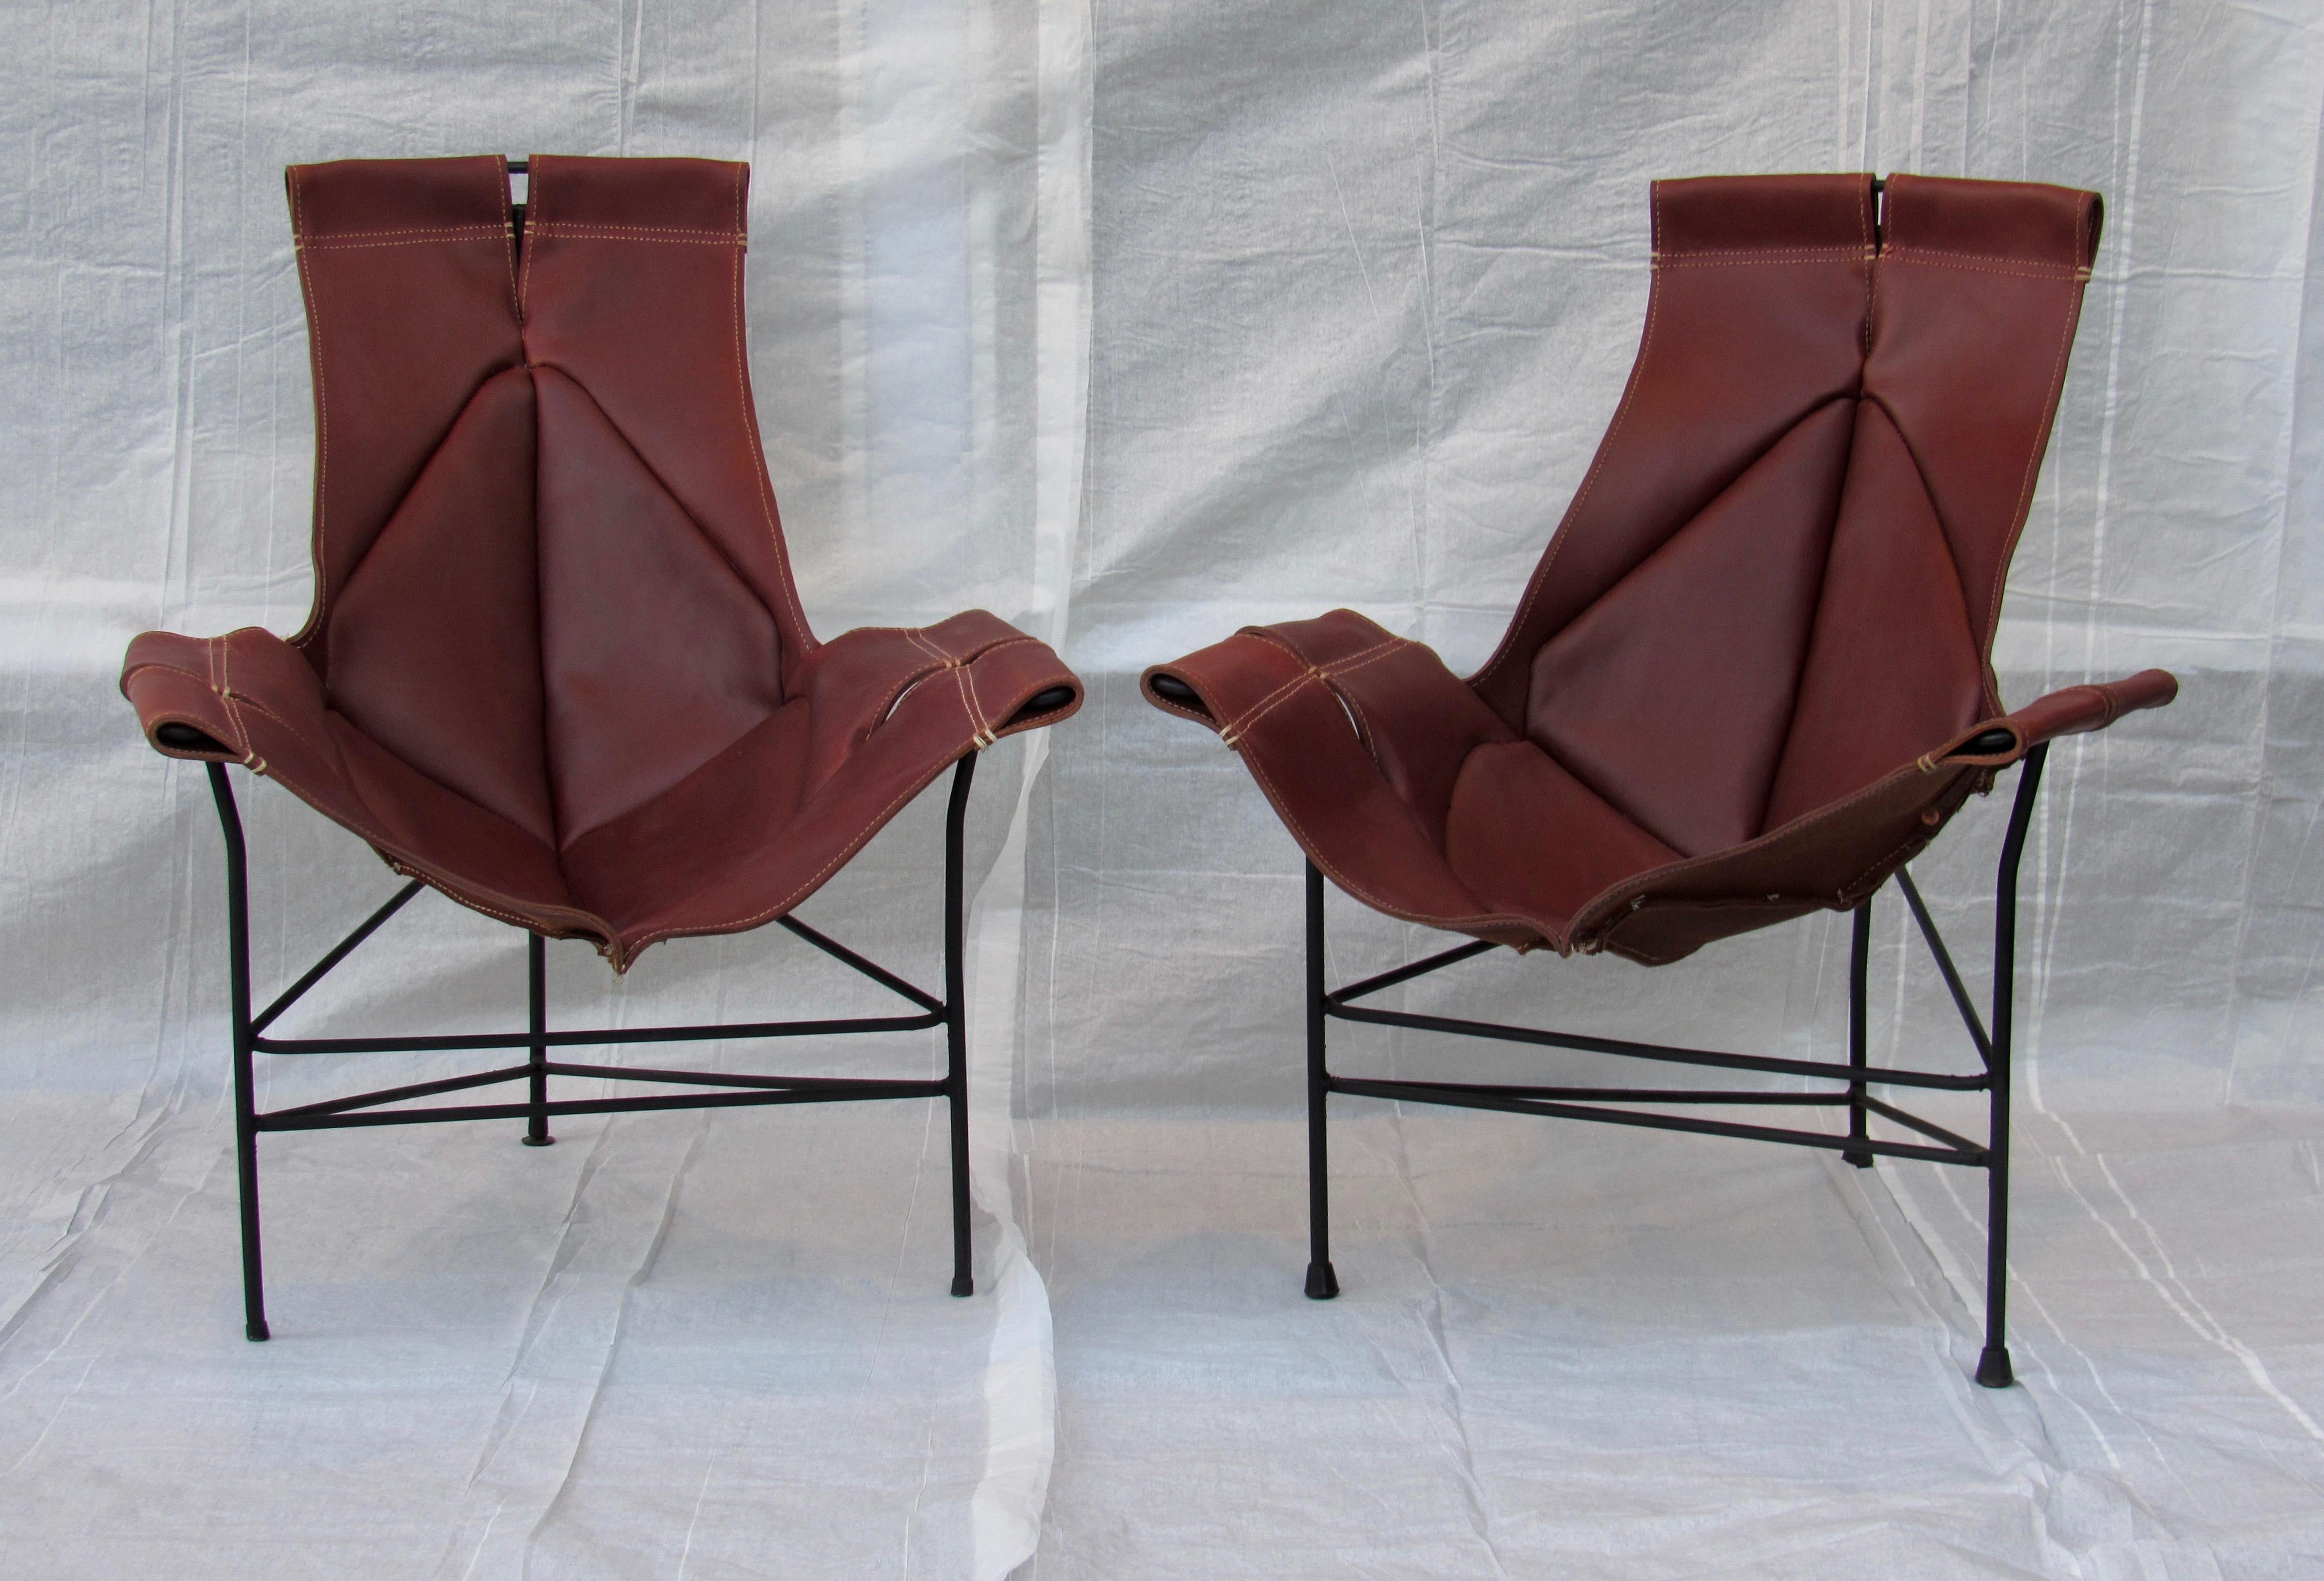 Wrought iron and leather sling lounge chairs designed by Jerry Johnson for Leathercraft, circa 1954.
Three available, two as pictured the 3rd can be custom fitted to your choice of color)
Pricing is per chair. 
The leather slings are stitched